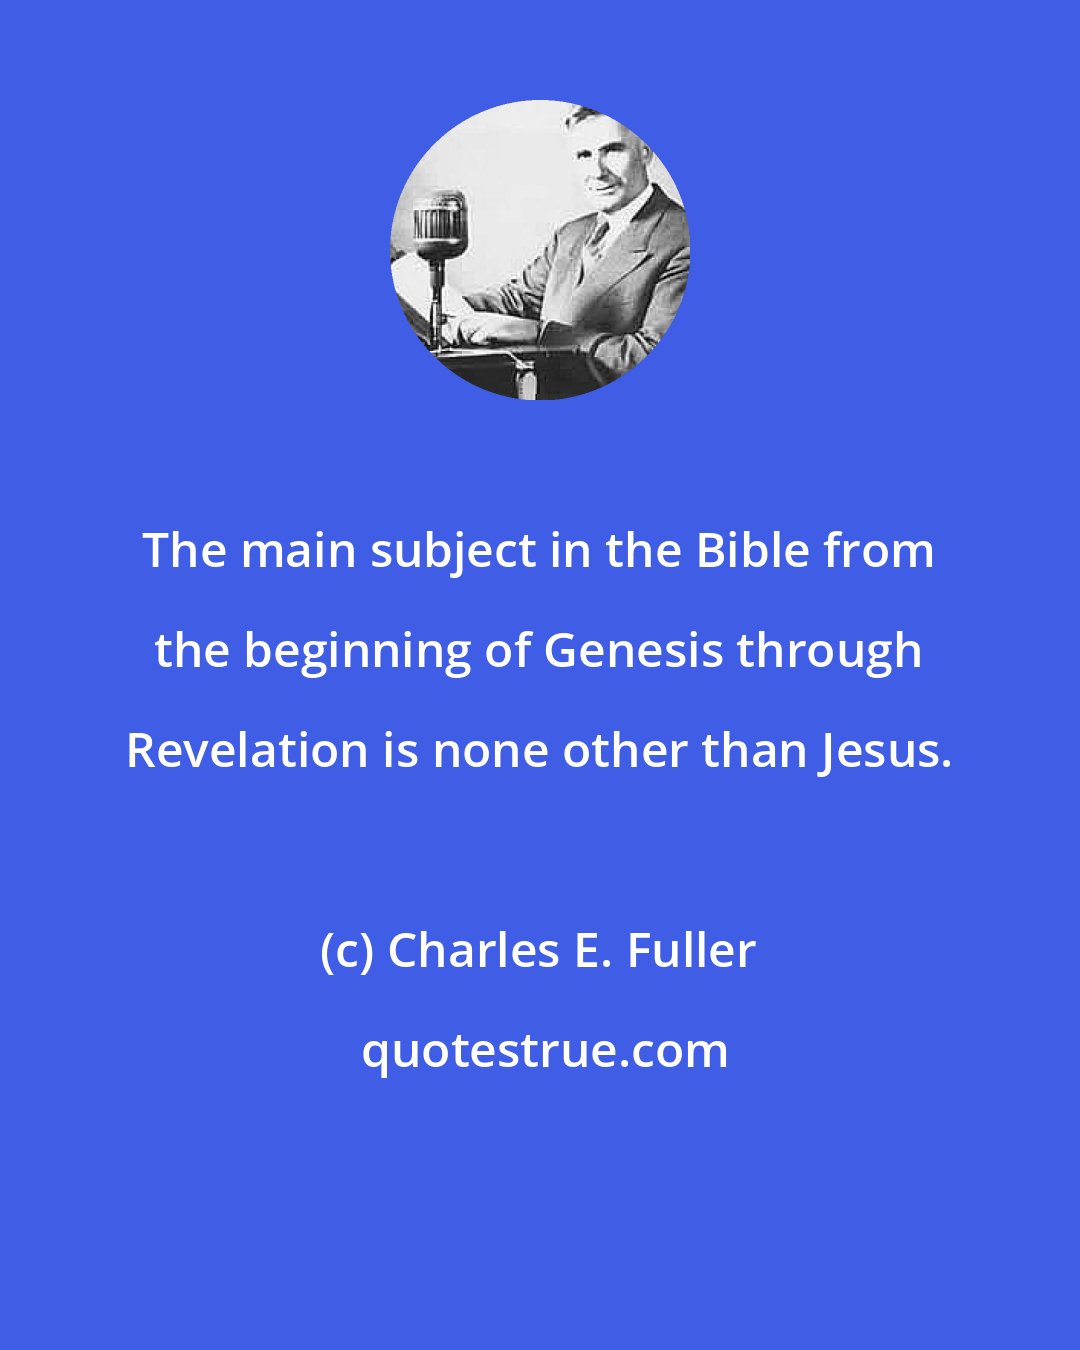 Charles E. Fuller: The main subject in the Bible from the beginning of Genesis through Revelation is none other than Jesus.